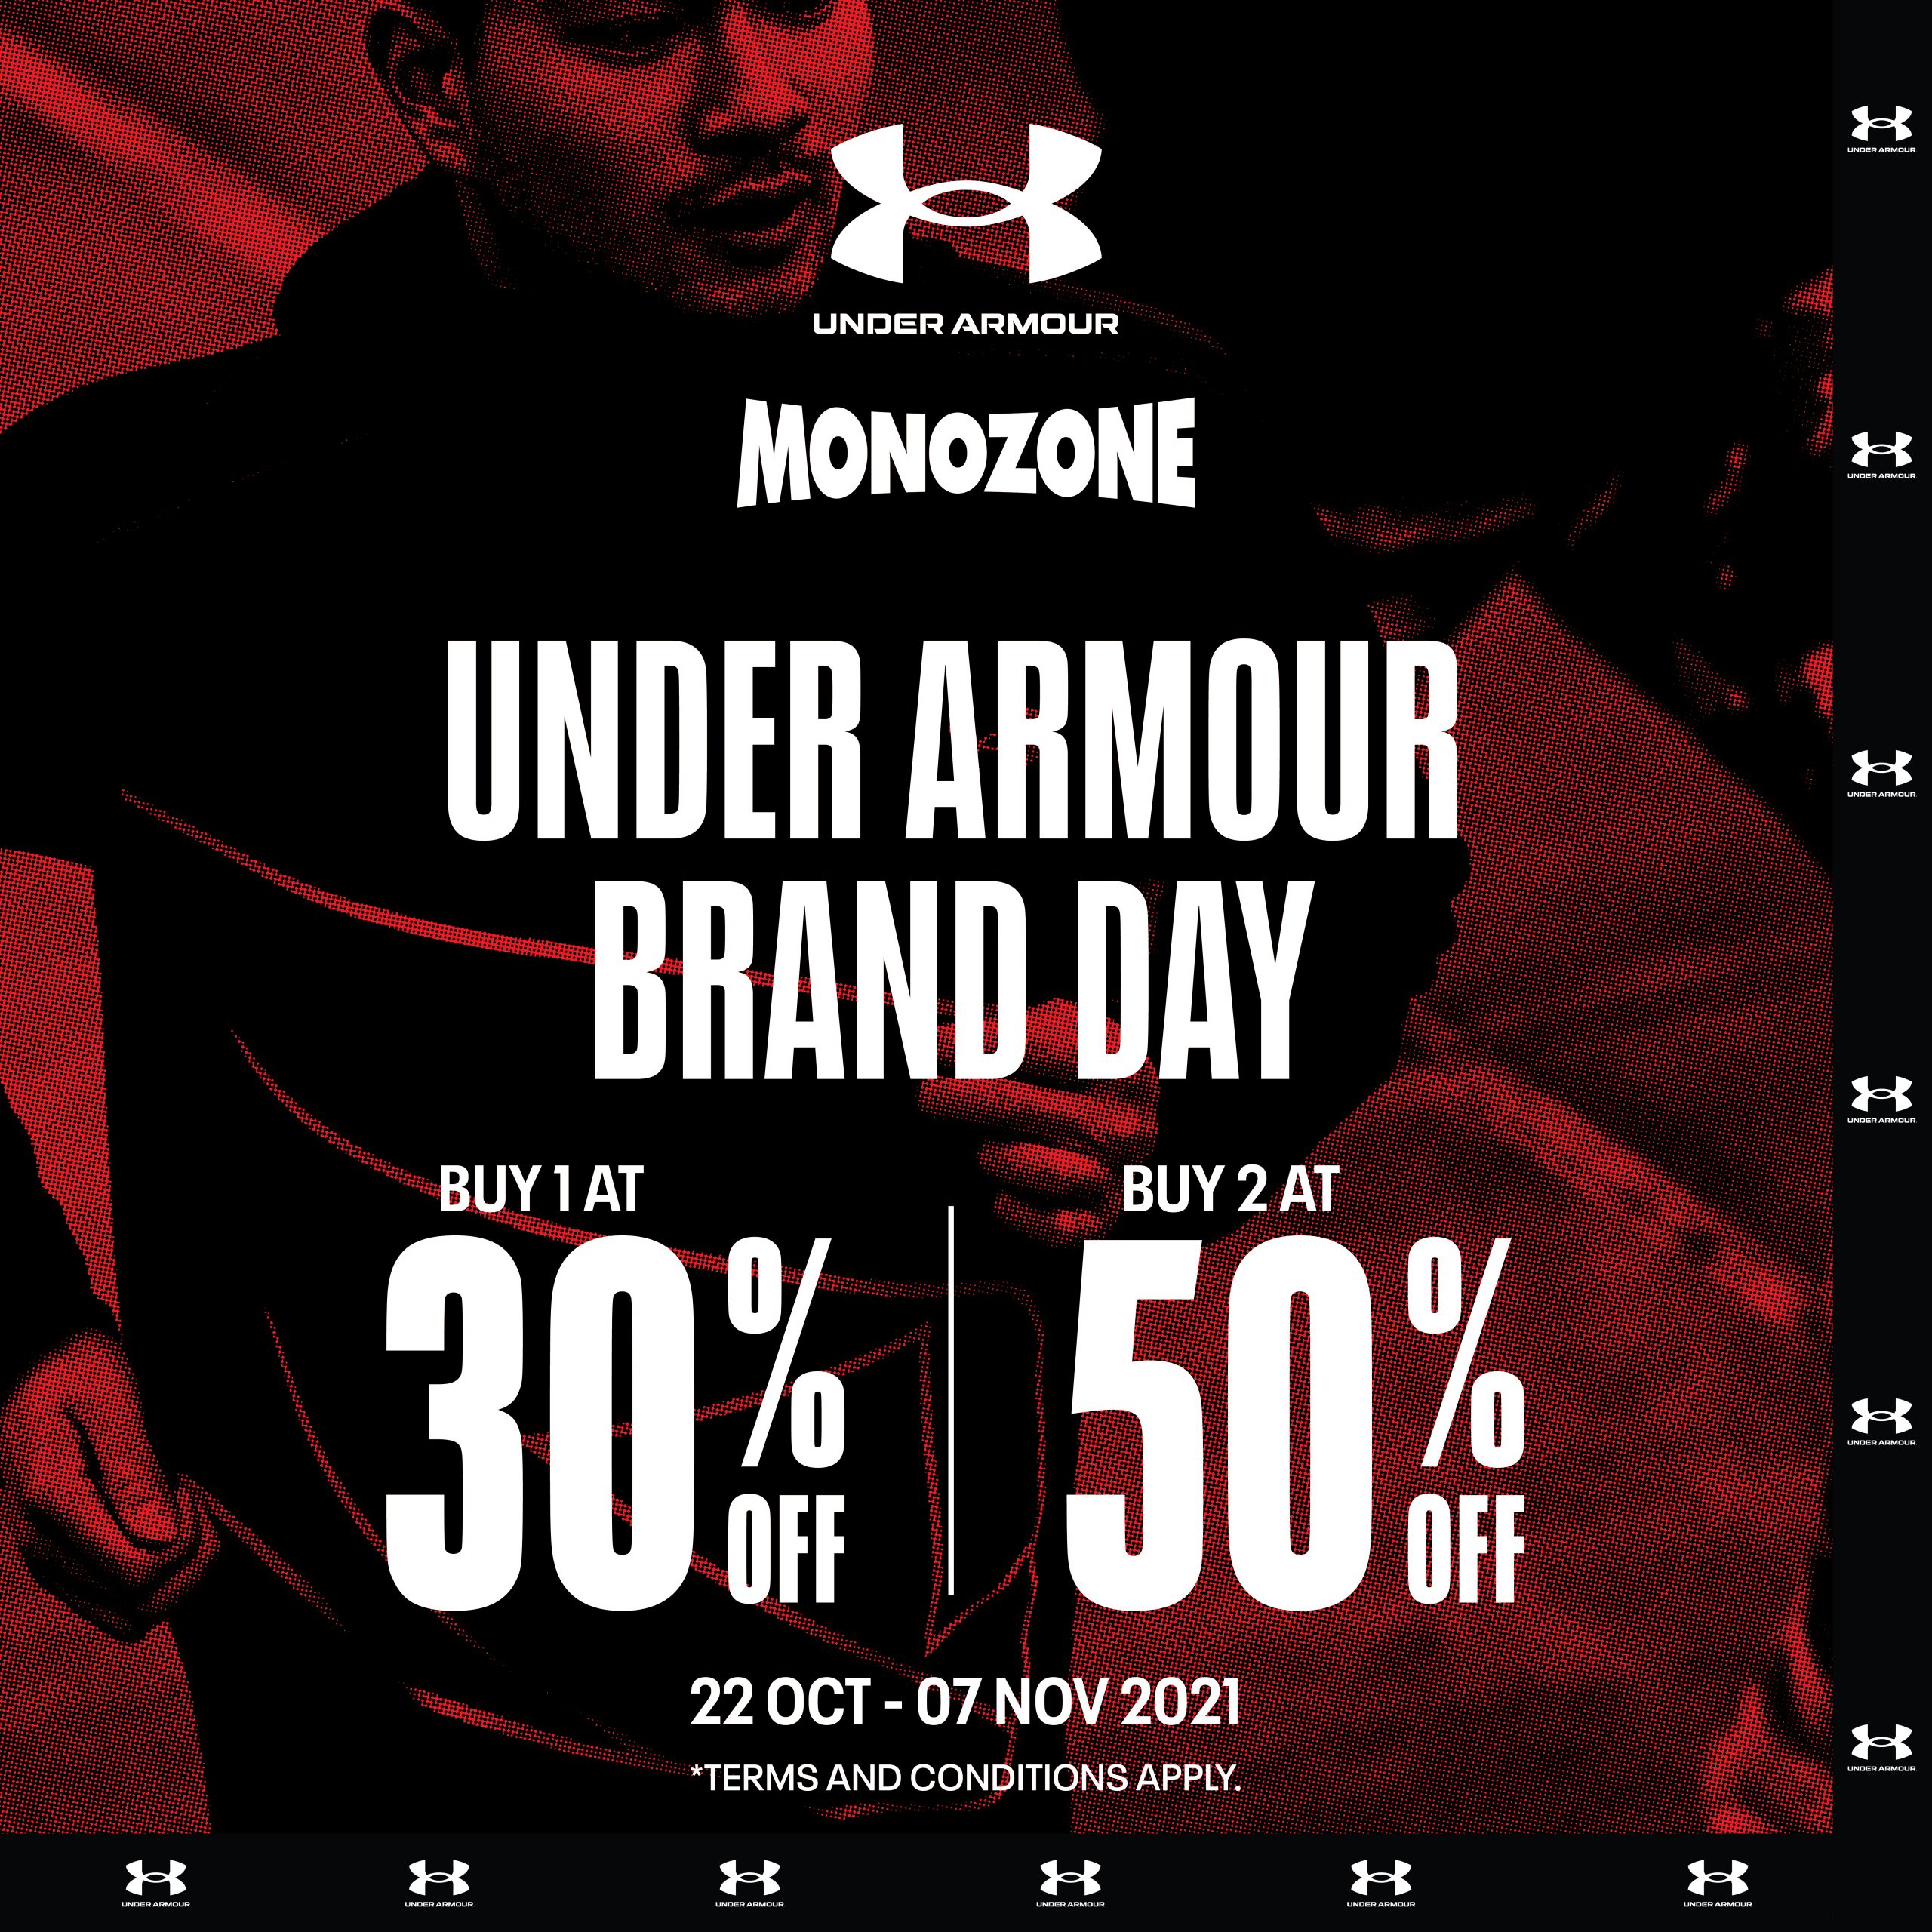 Under Armour Brand Day - LEA GROUP OF COMPANIES